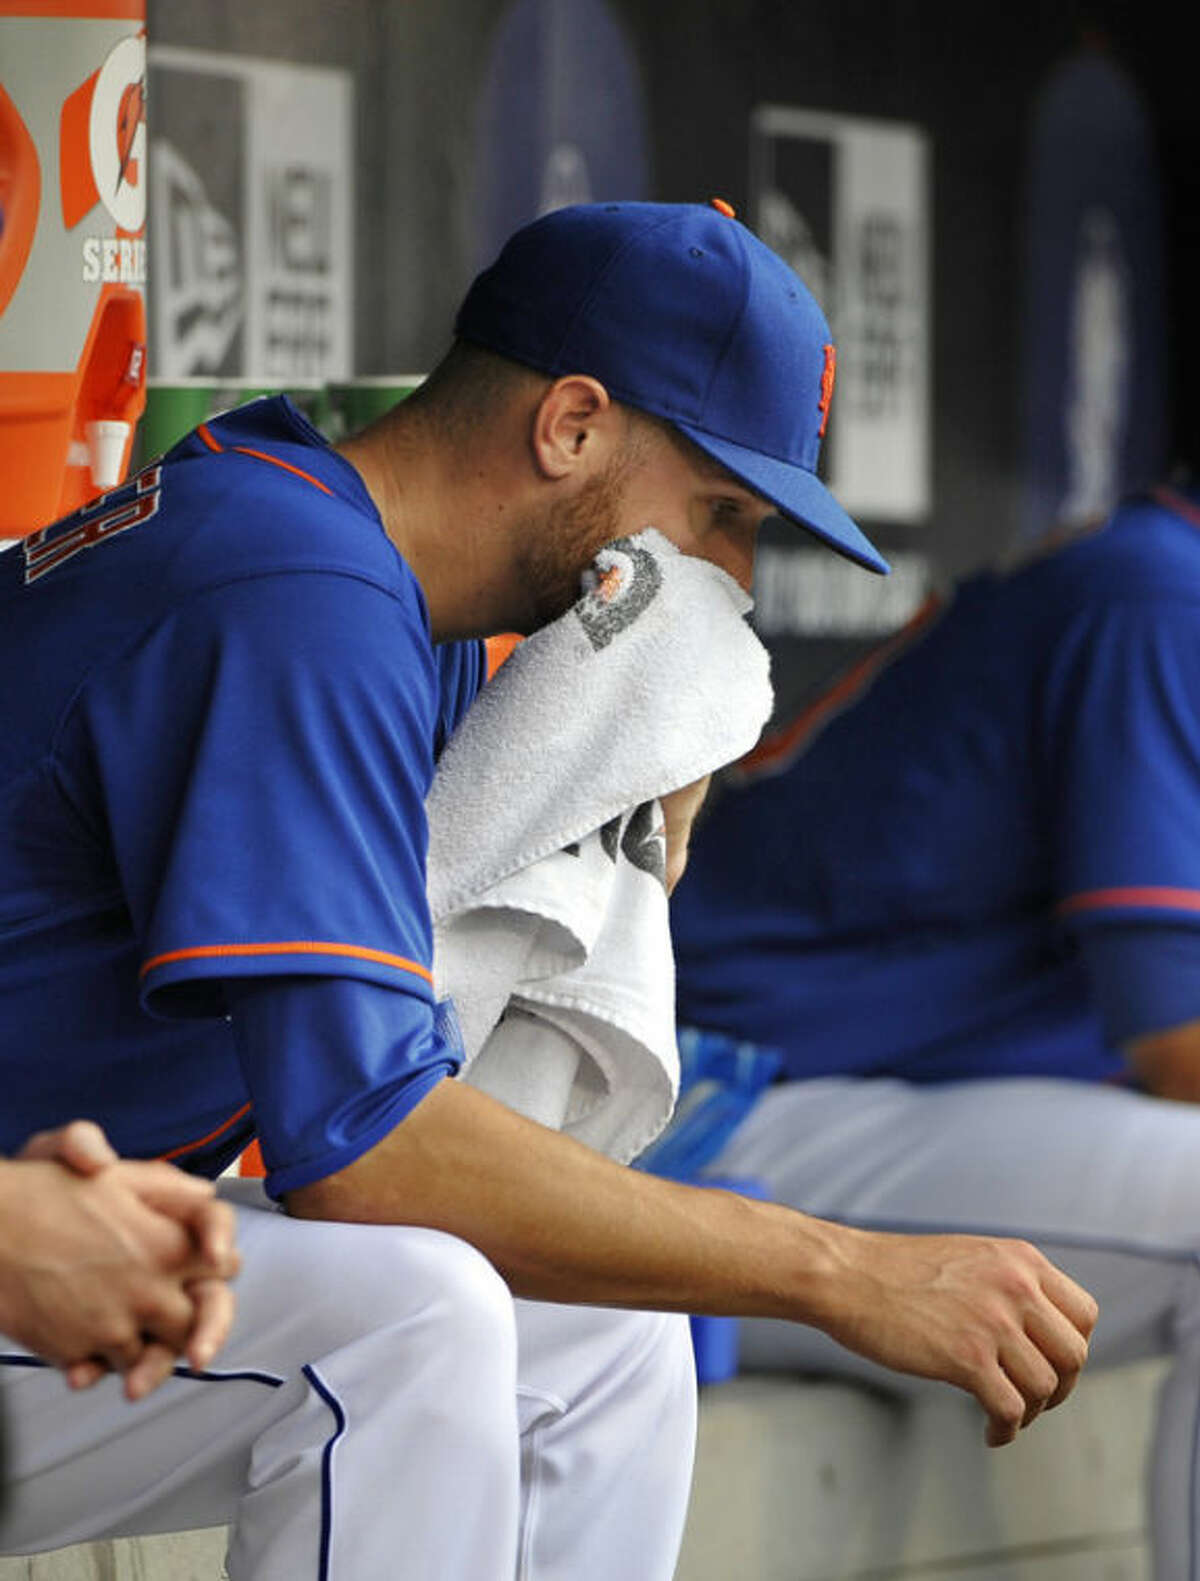 New York Mets starting pitcher Zack Wheeler sits in the dugout after being taken out of the baseball game against the Washington Nationals in the fifth inning at Citi Field on Sunday, June 30, 2013 in New York. (AP Photo/Kathy Kmonicek)